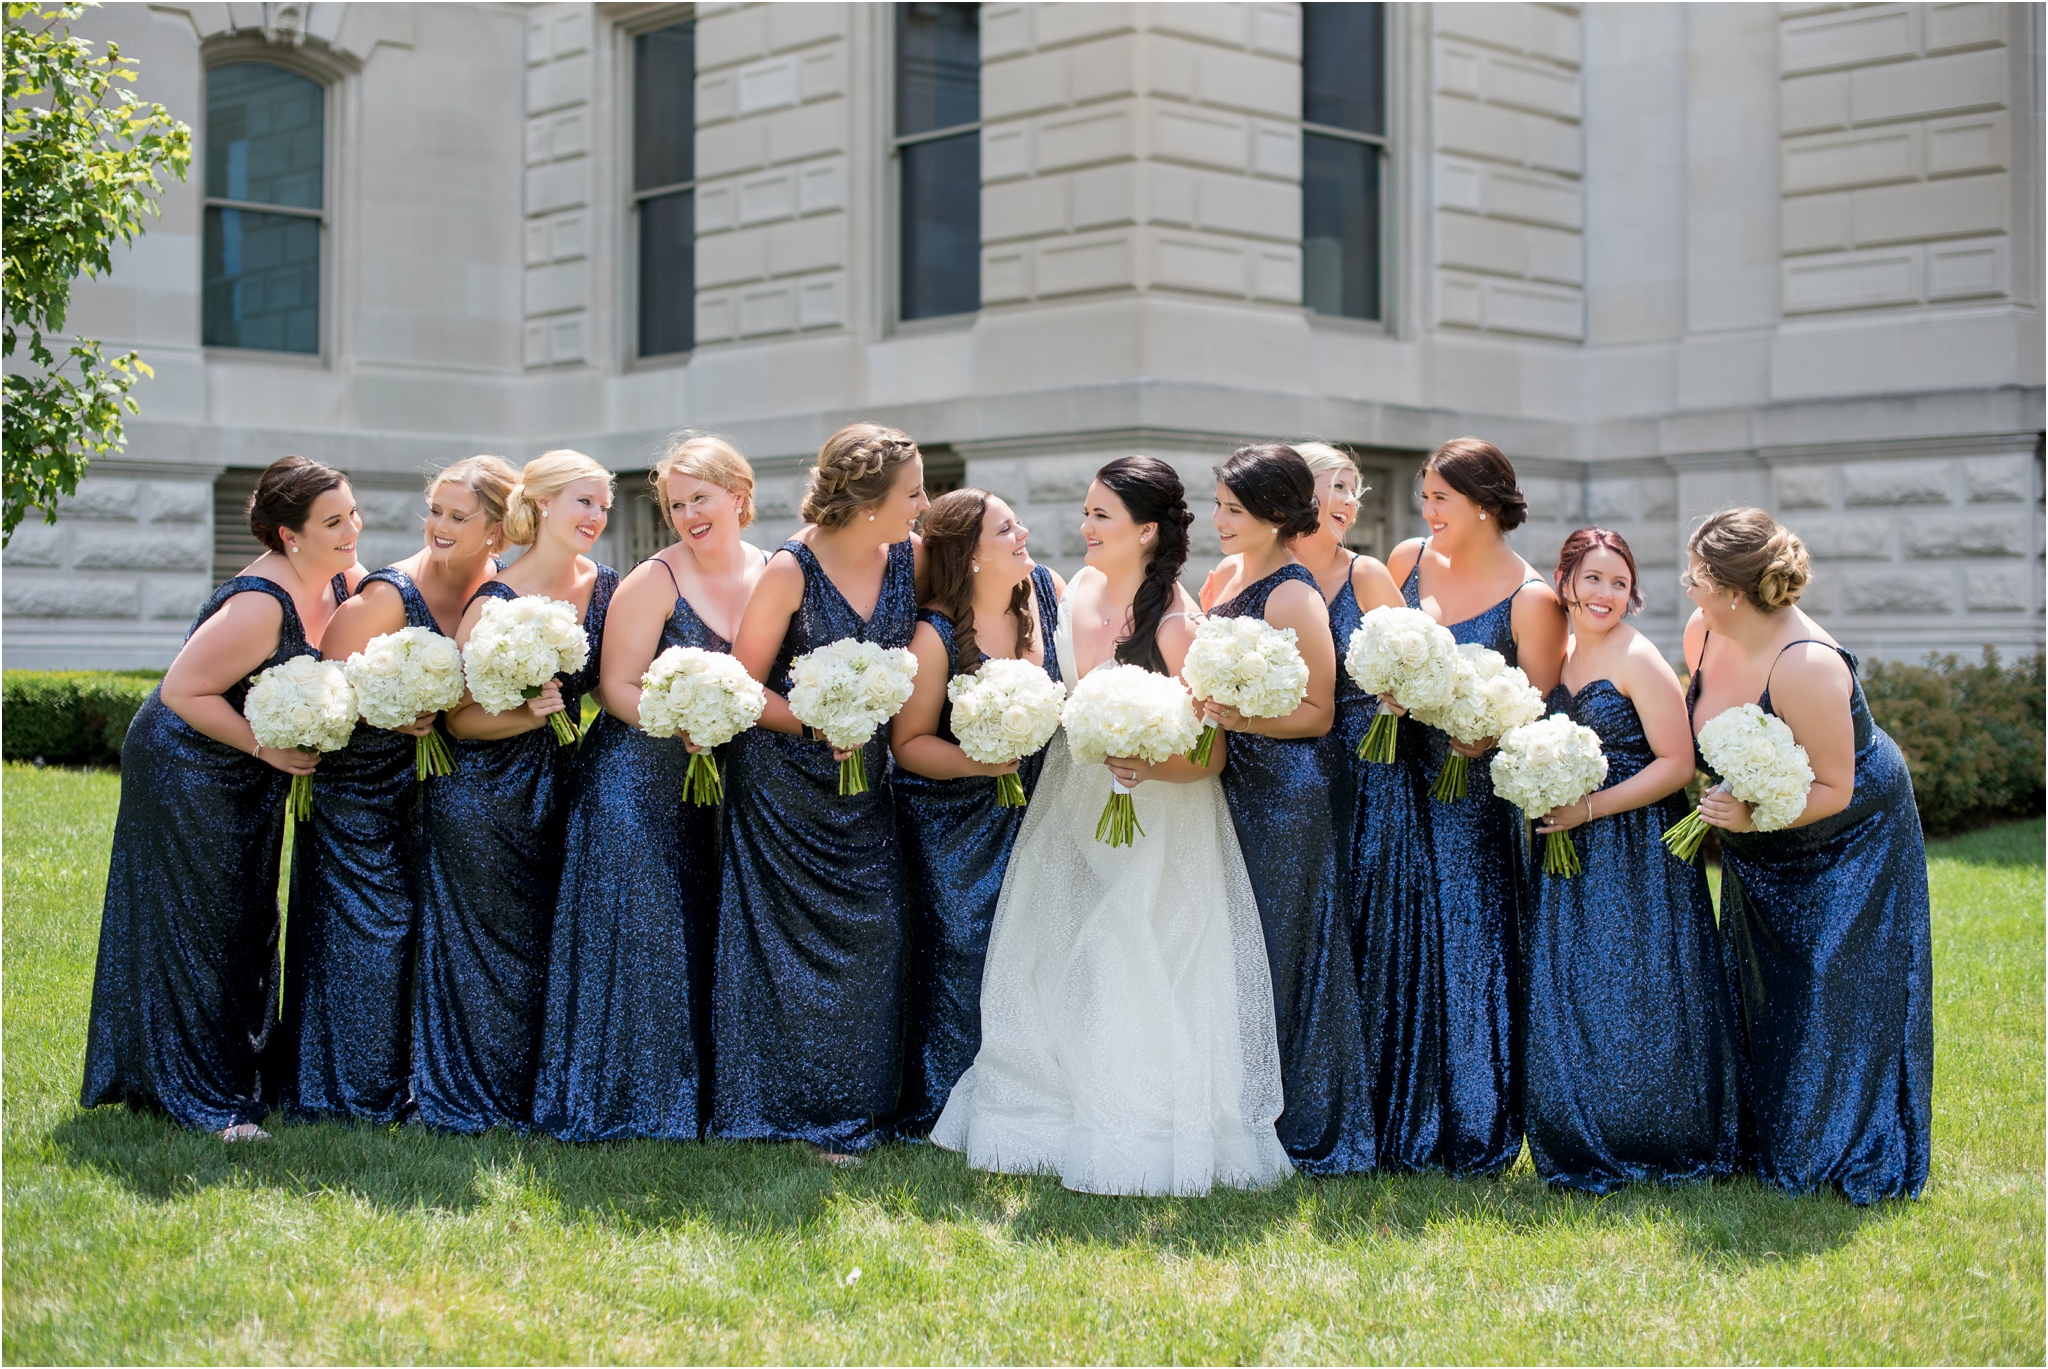 Regions Tower Wedding | Sarah and Rachel Wedding Photographers | Indianapolis, IN | Sequin Gown